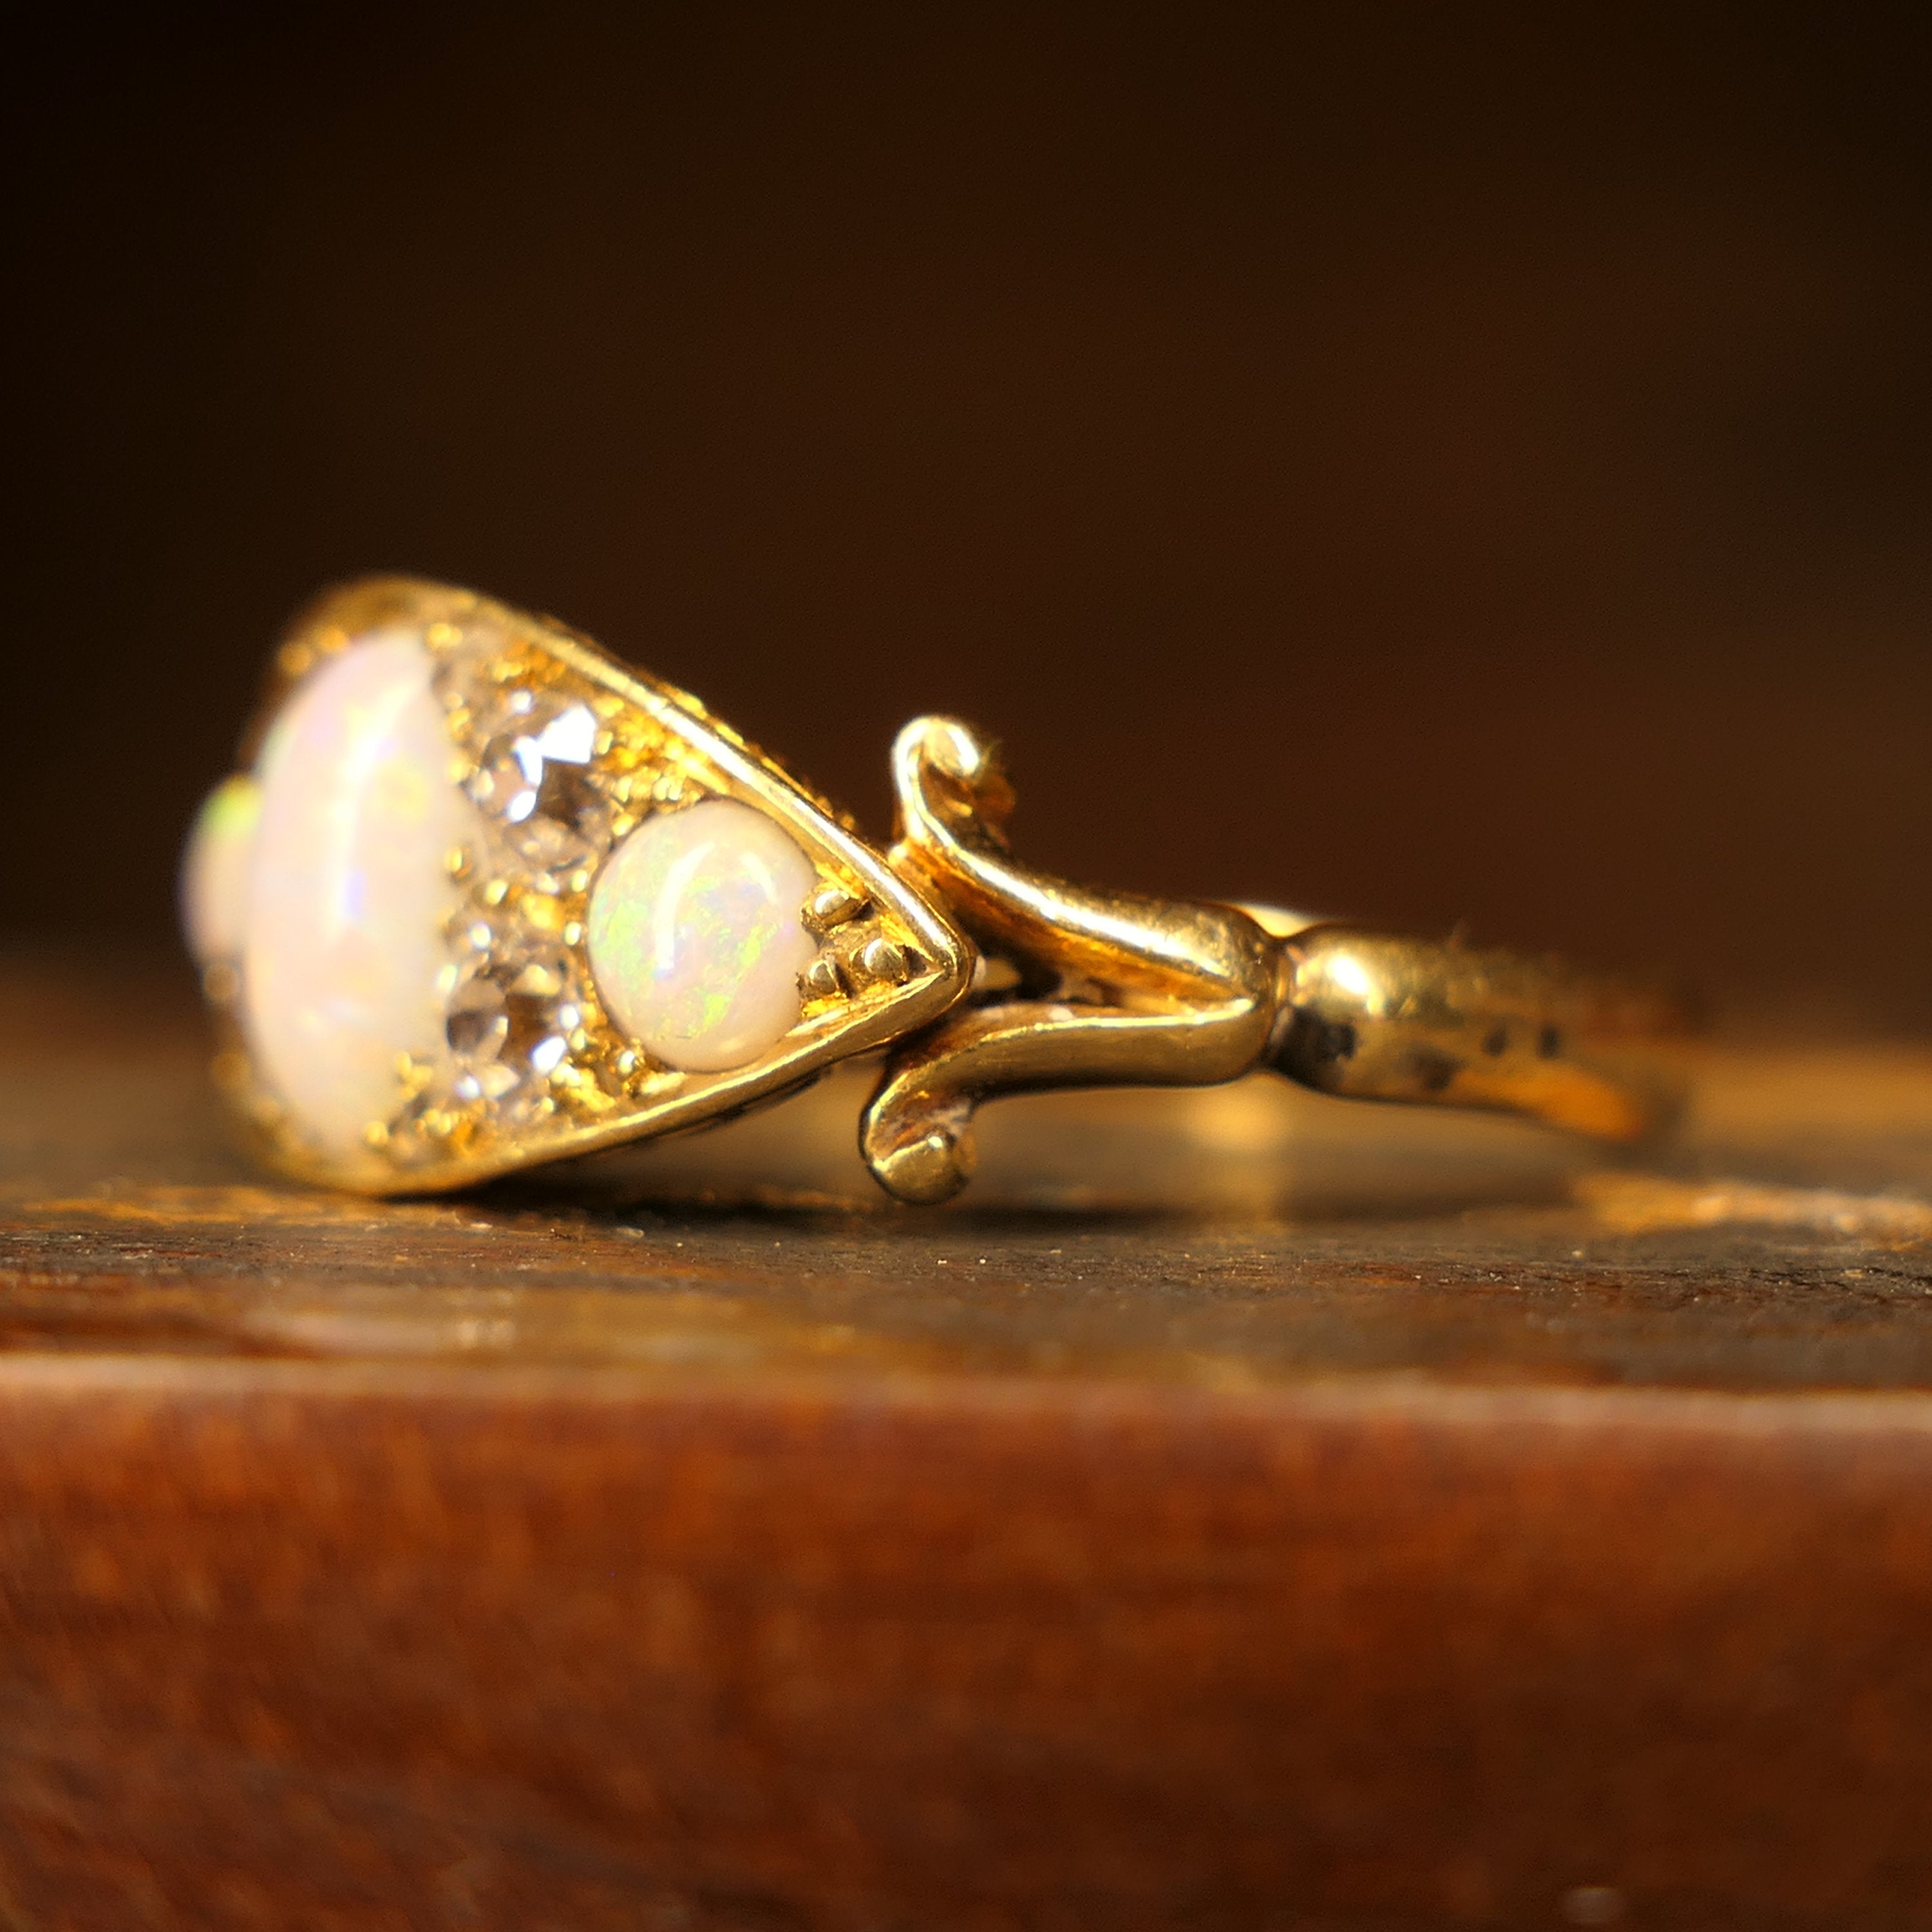 Victorian, 18ct Gold, Opal & Old Cut Diamond Ring